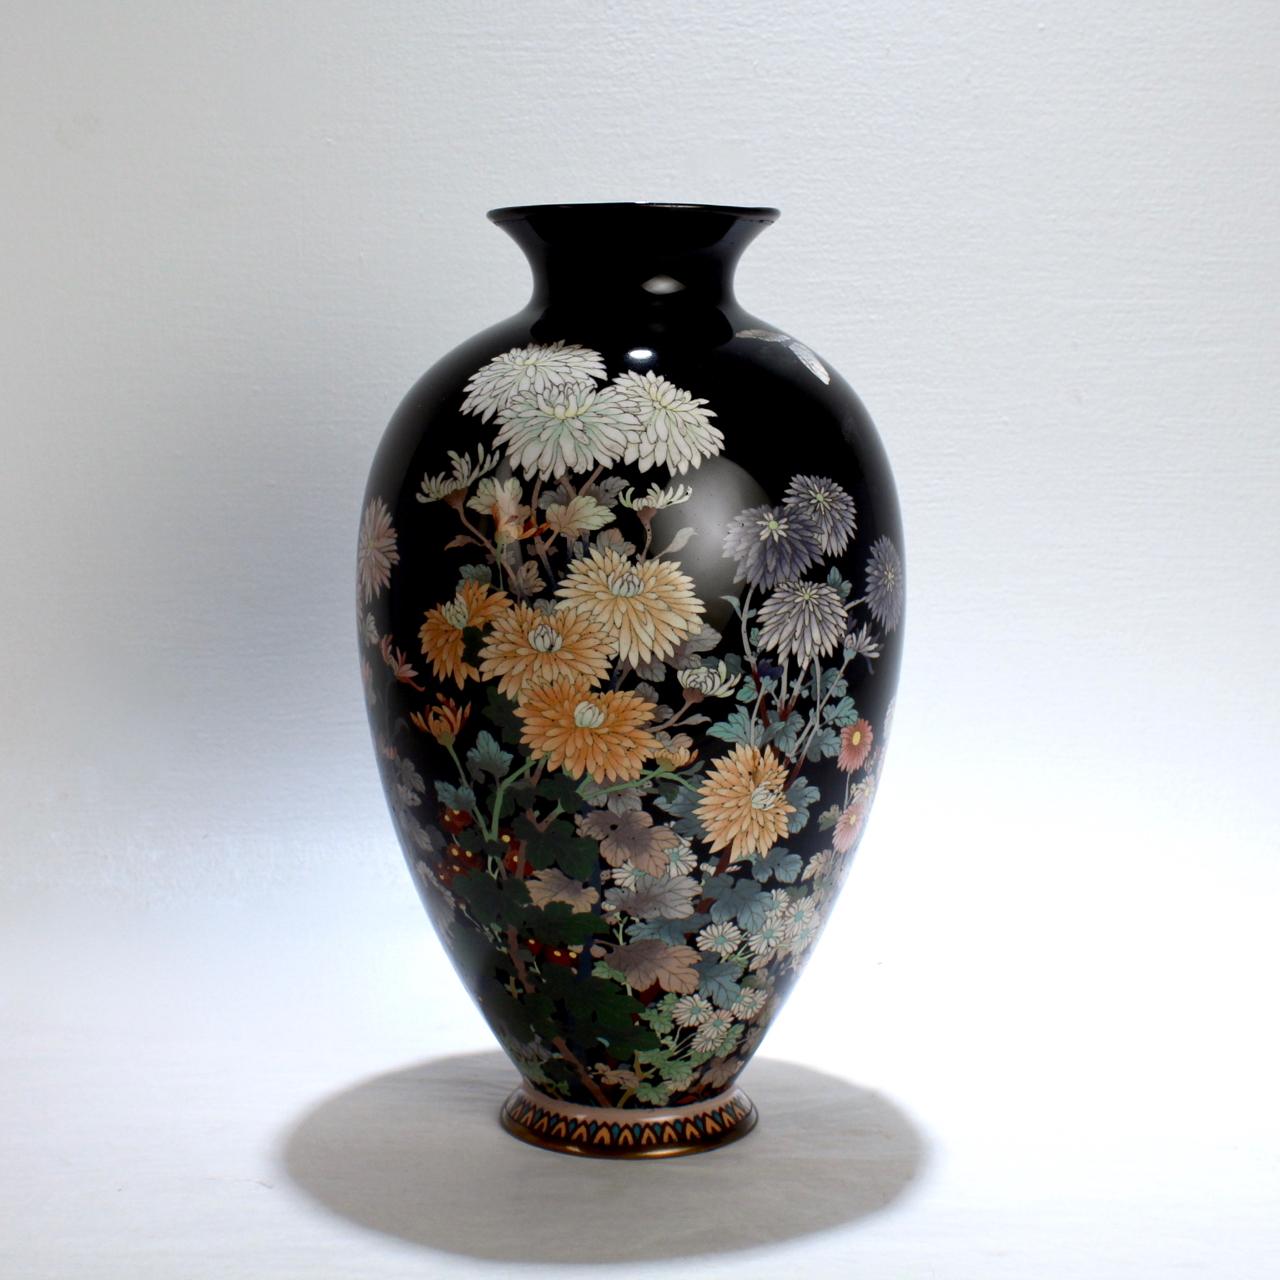 A large antique Japanese cloisonné vase.

With blooming chrysanthemums, daisies, and butterflies on a black ground. 

Meiji period. 

Measures: Height ca. 12 in.

   




     